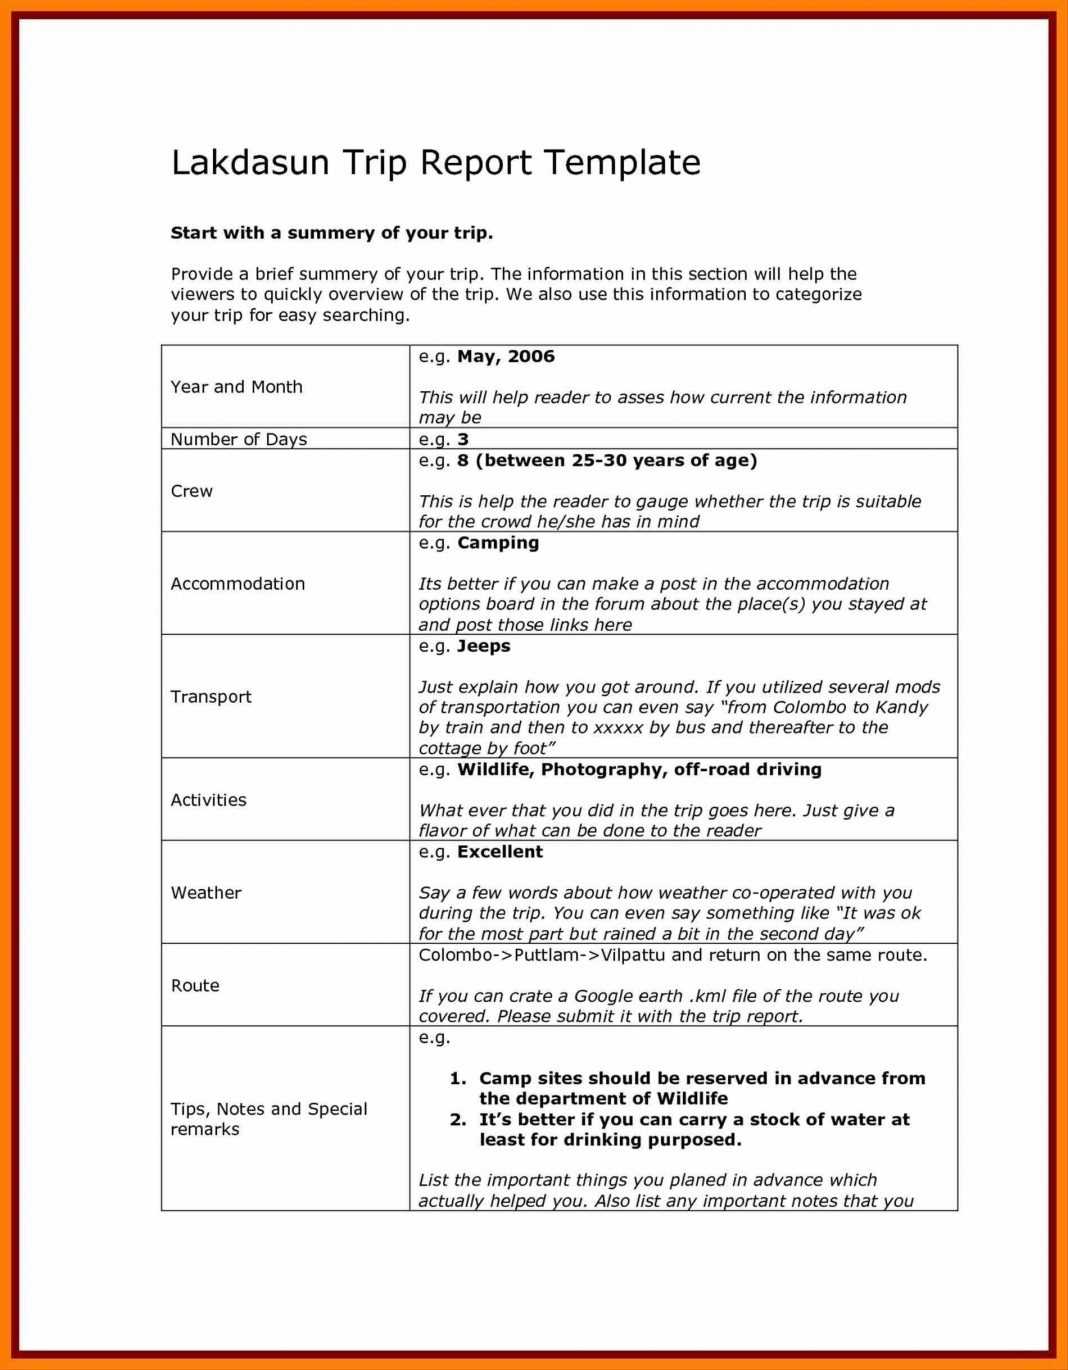 Sales Trip Report Template Examples Word Us Army Visit Doc For Sales Trip Report Template Word